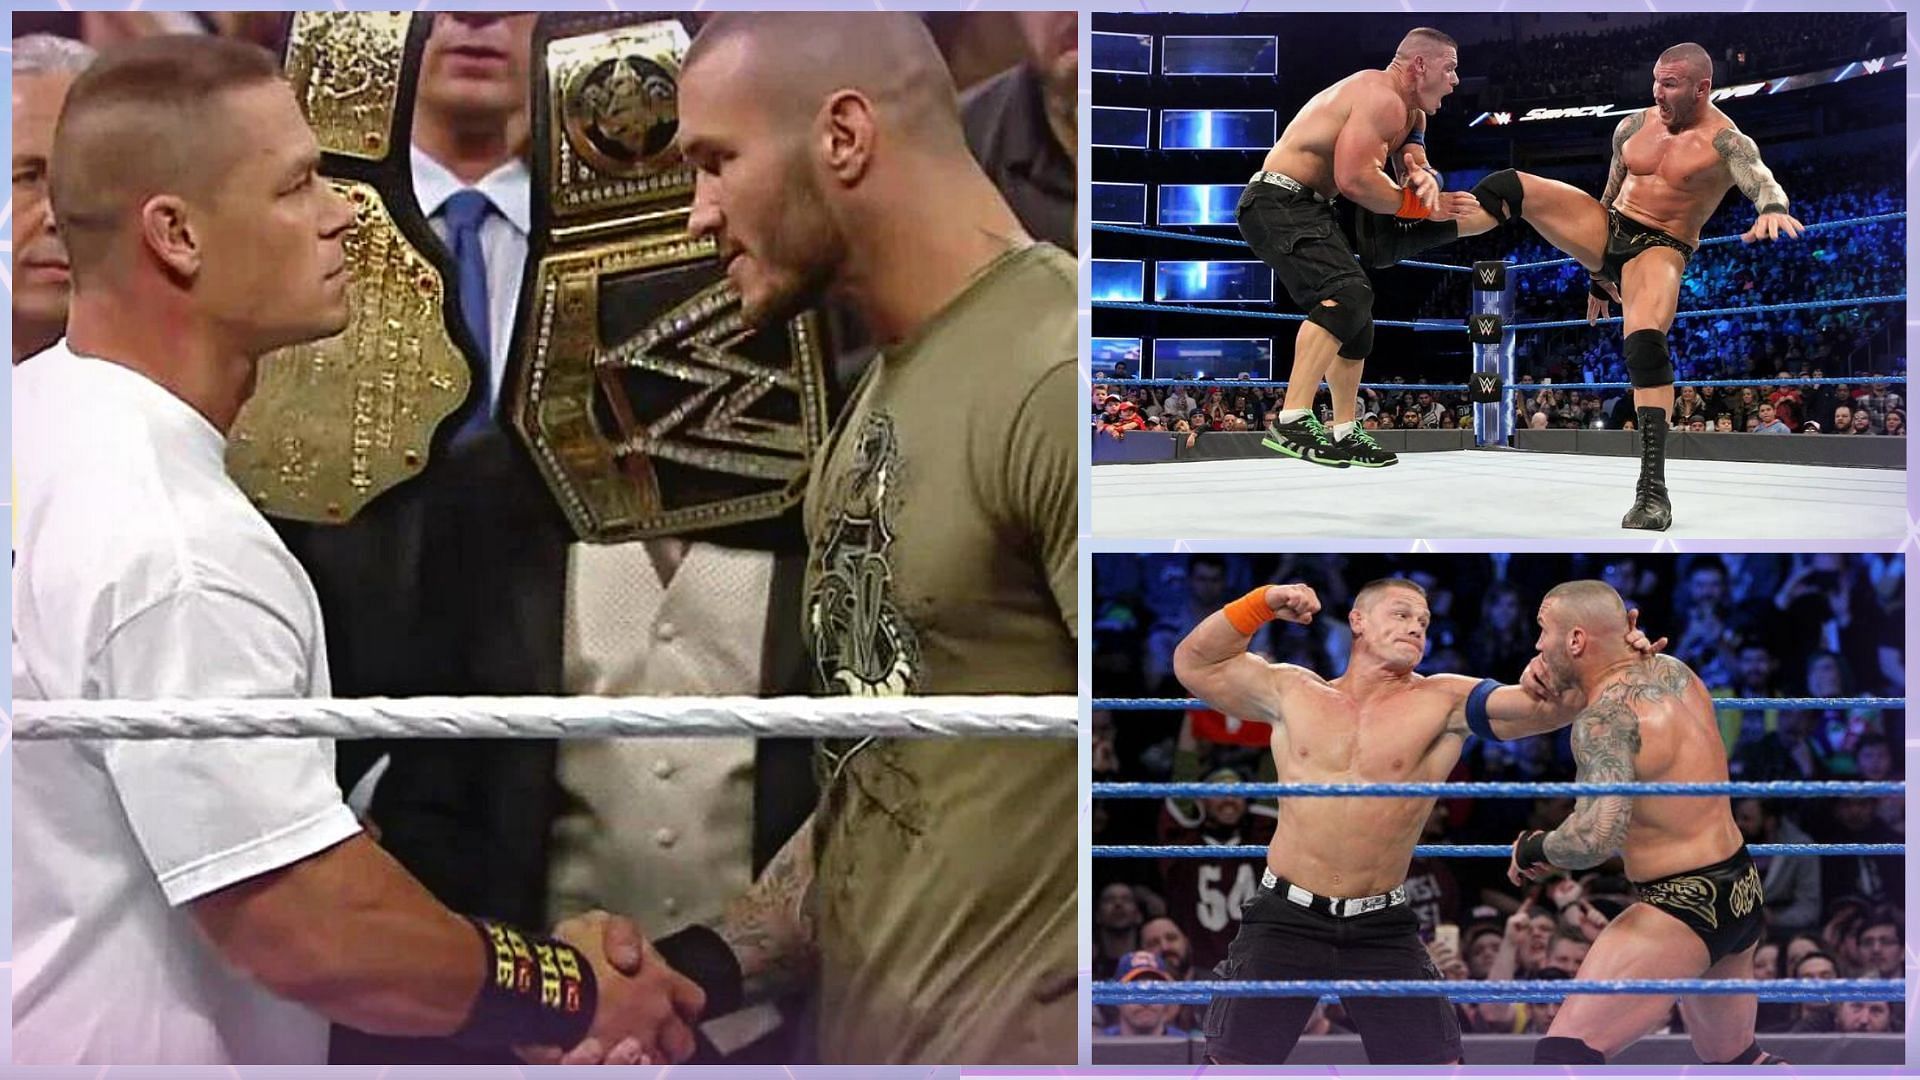 WWE Superstars John Cena and Randy Orton have been friends since their OVW days.